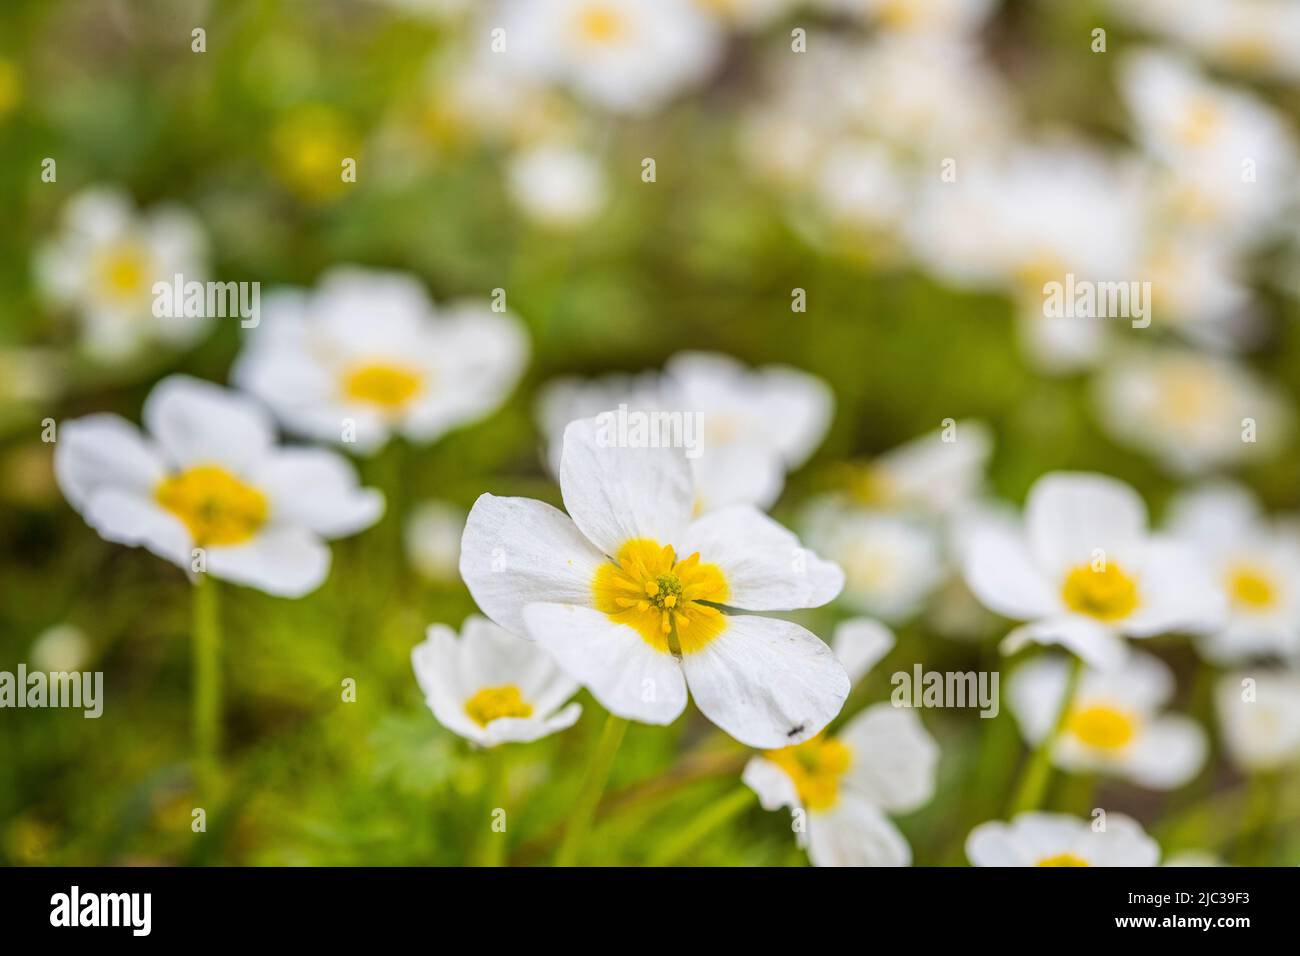 Ranunculus peltatus, the pond water-crowfoot is a plant species in the genus Ranunculus, native to Europe, southwestern Asia and northern Africa. Stock Photo